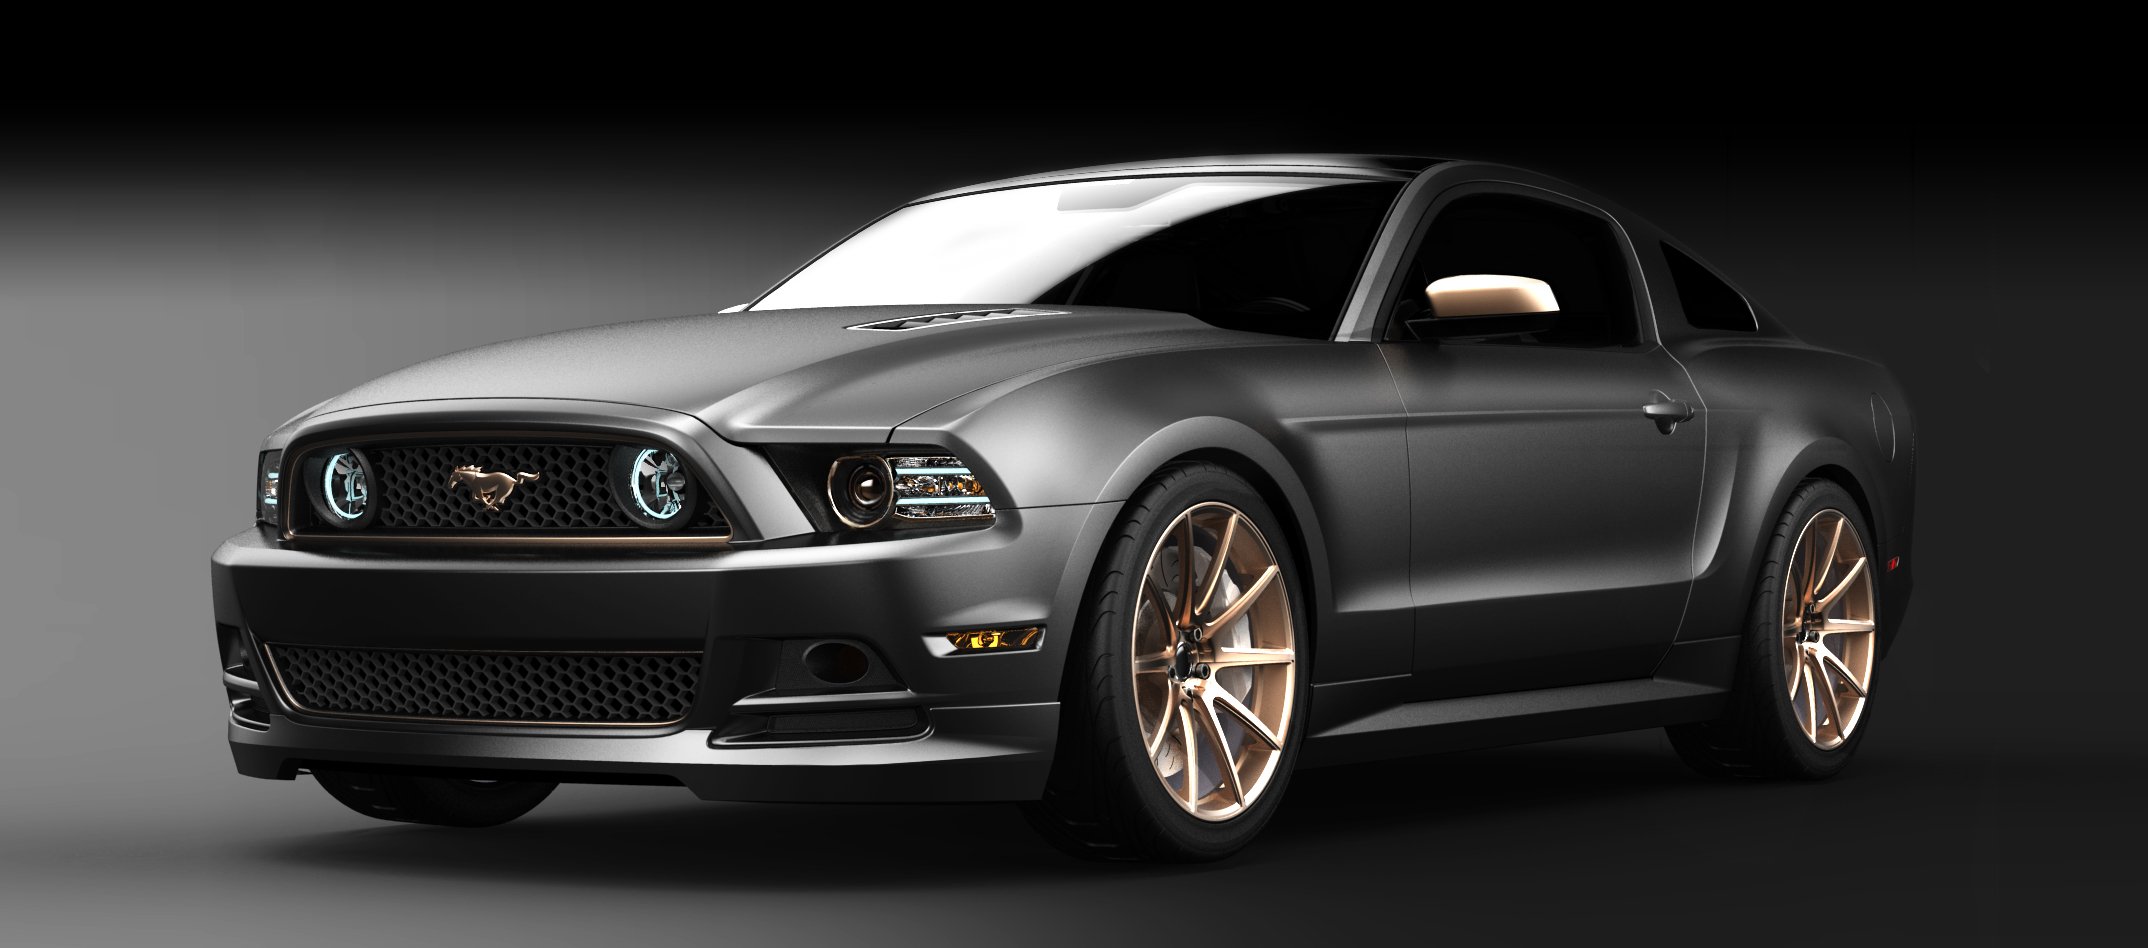 ‘High Gear’ Concept Is First SEMA Mustang Build Powered By Women